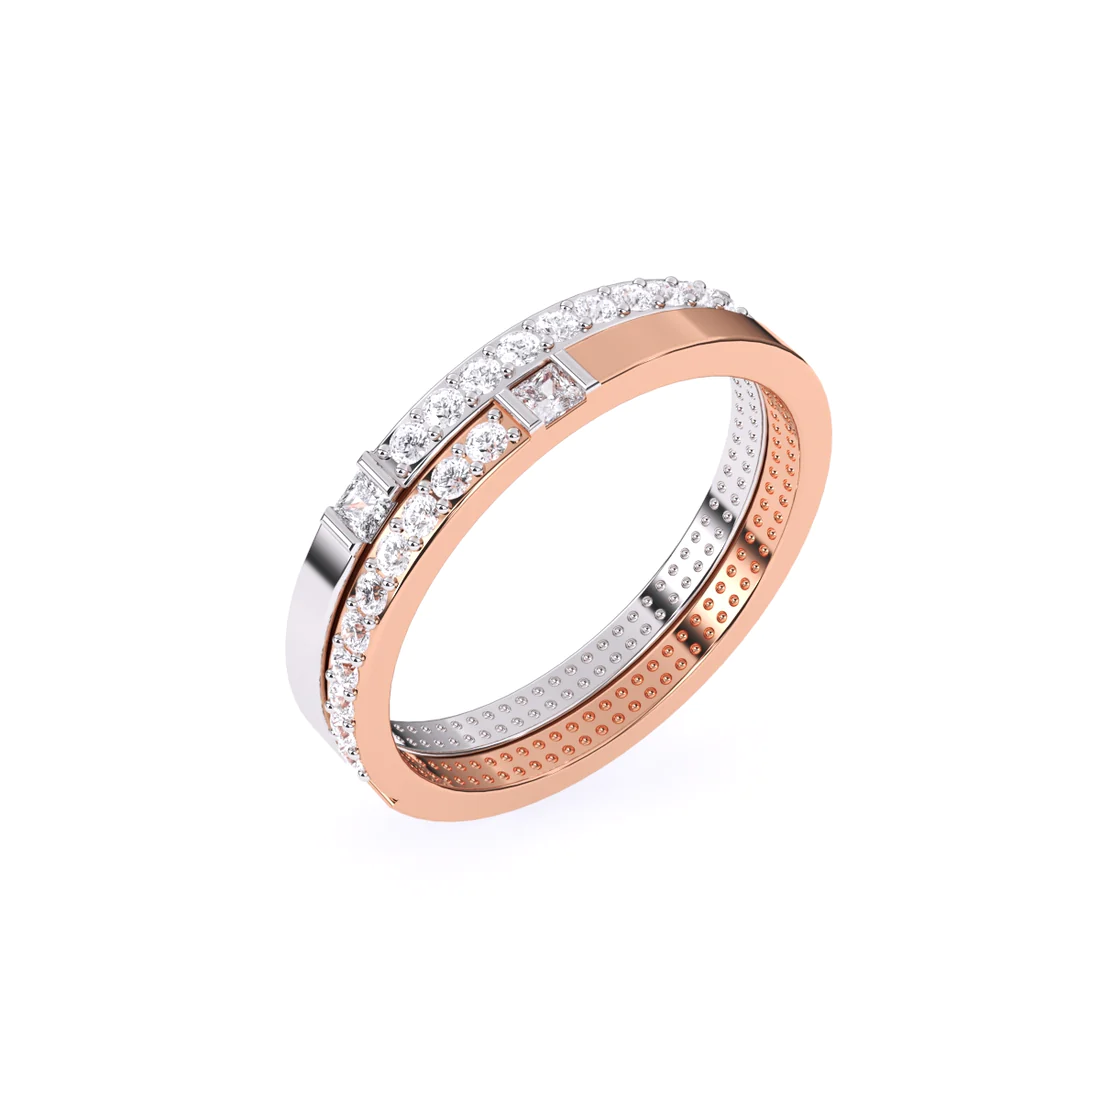 Indulge in timeless beauty with lab grown diamond rings